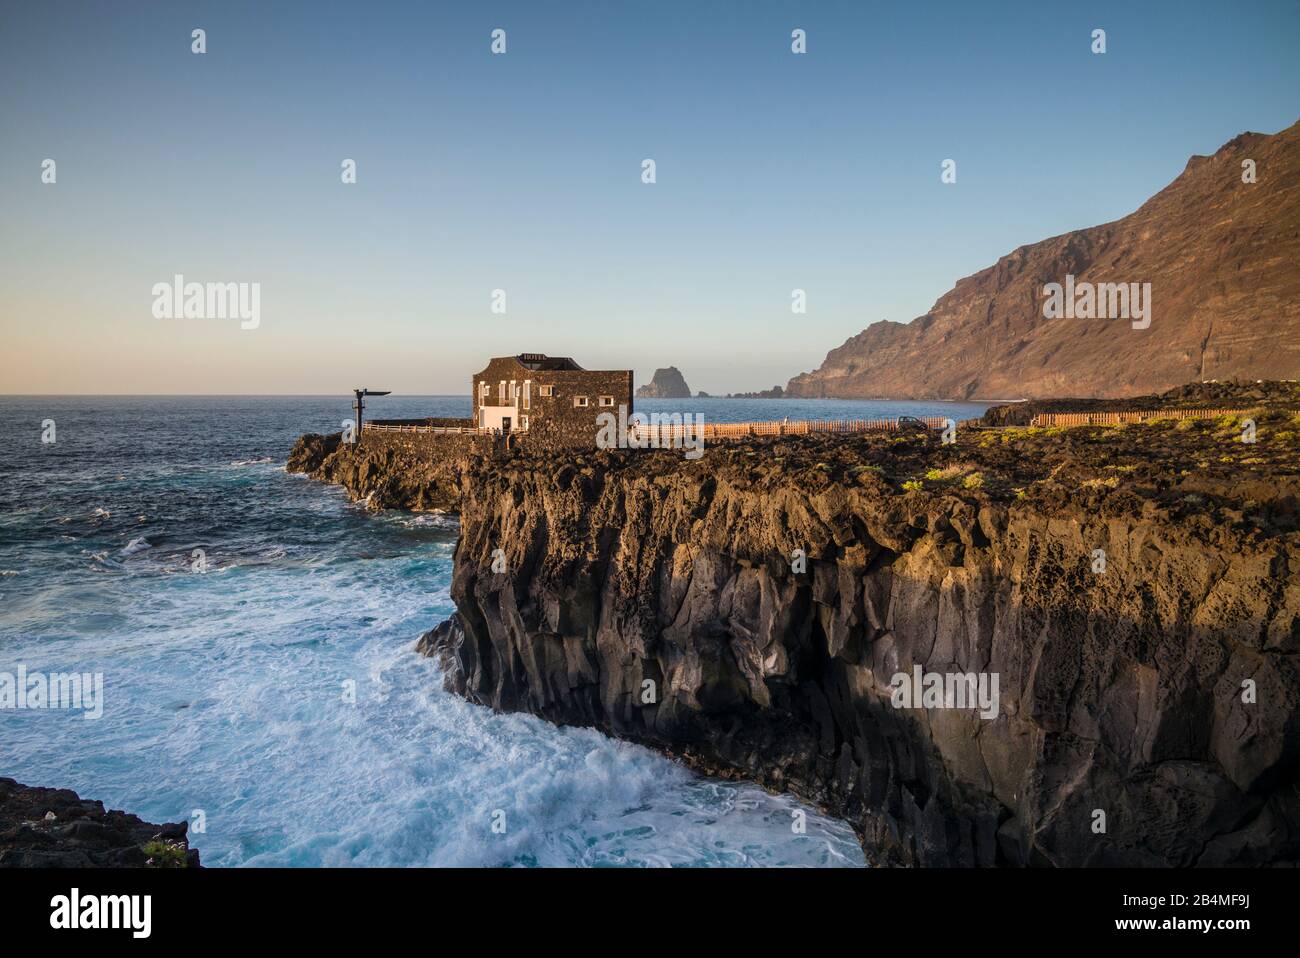 Spain, Canary Islands, El Hierro Island, Las Puntas, Hotel Puntagrande, listed in the Guinness Book of World Records as the smallest hotel in the world, sunset Stock Photo